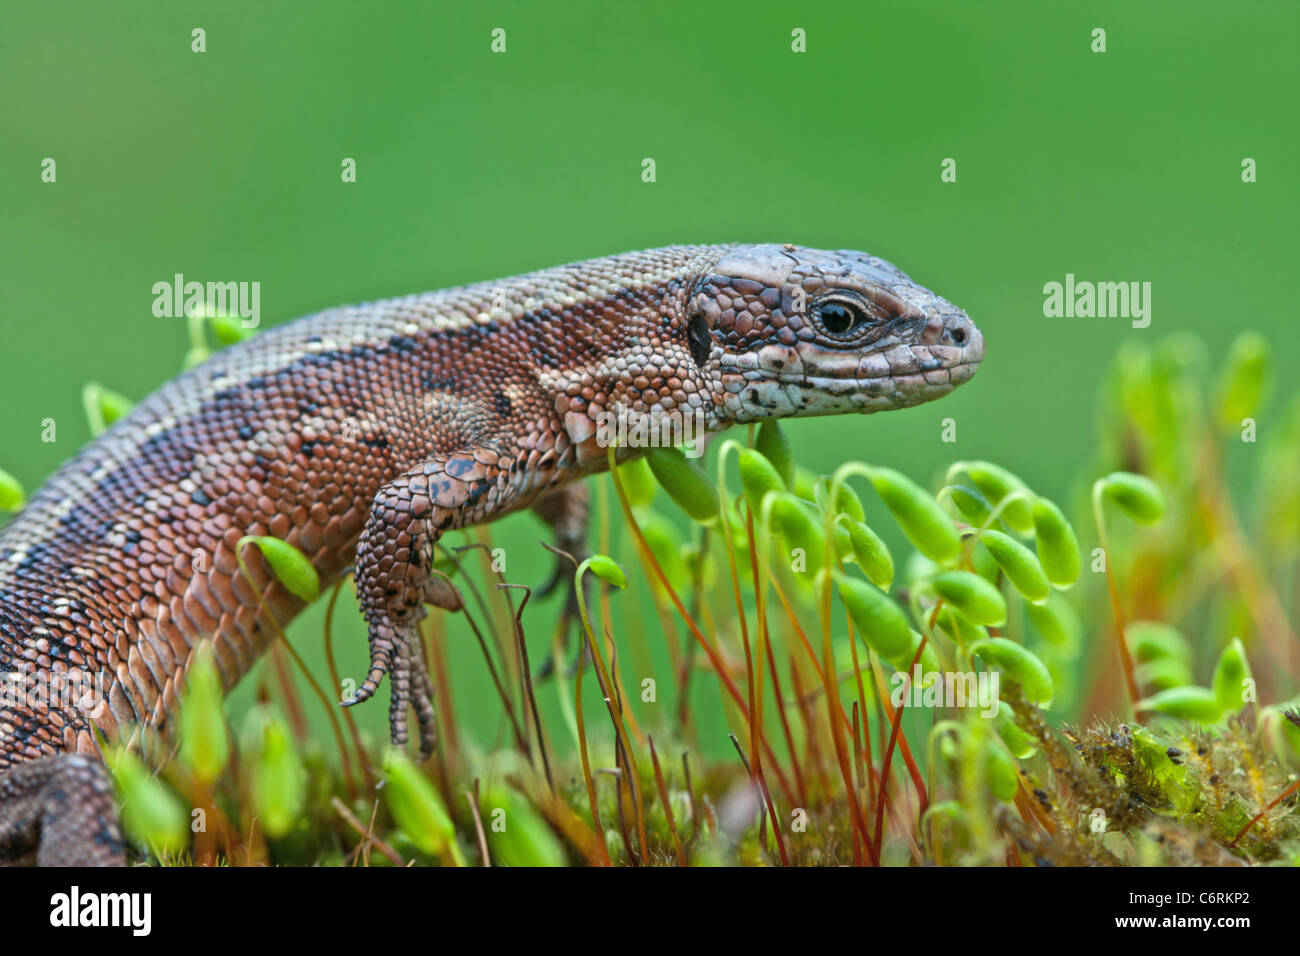 A captive Common Lizard walking on moss with a green background Stock Photo